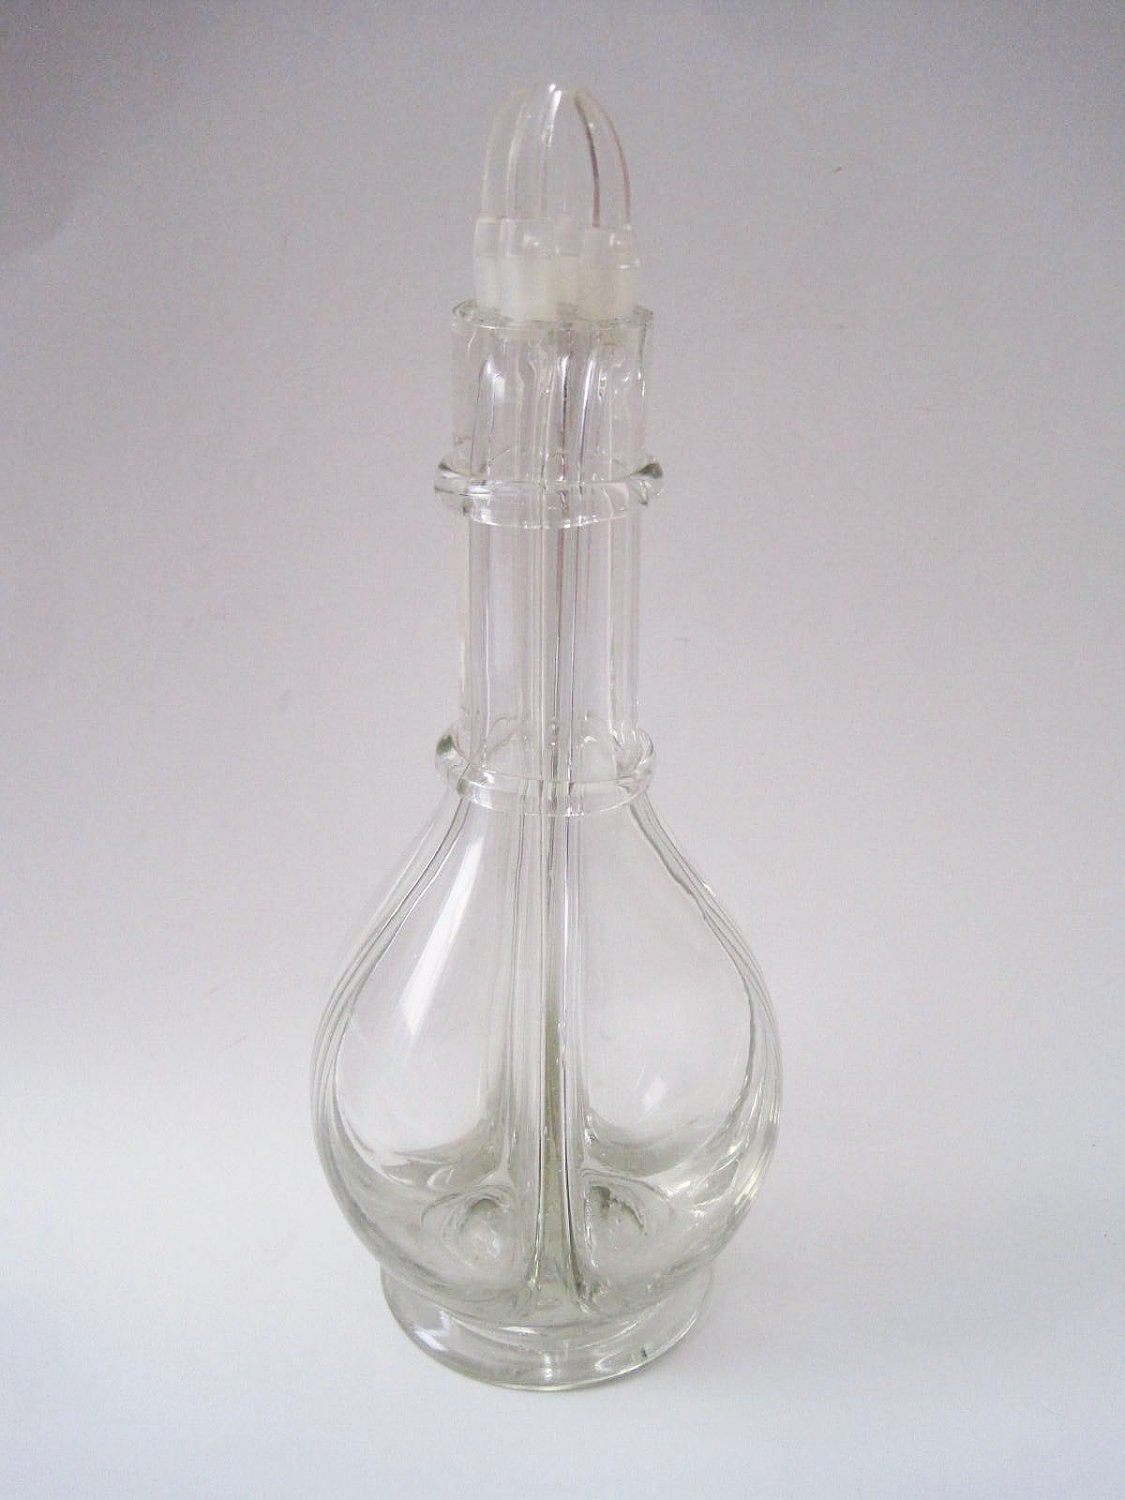 Vintage 4 Chamber Glass Liquor Decanter Hand Blown Made In